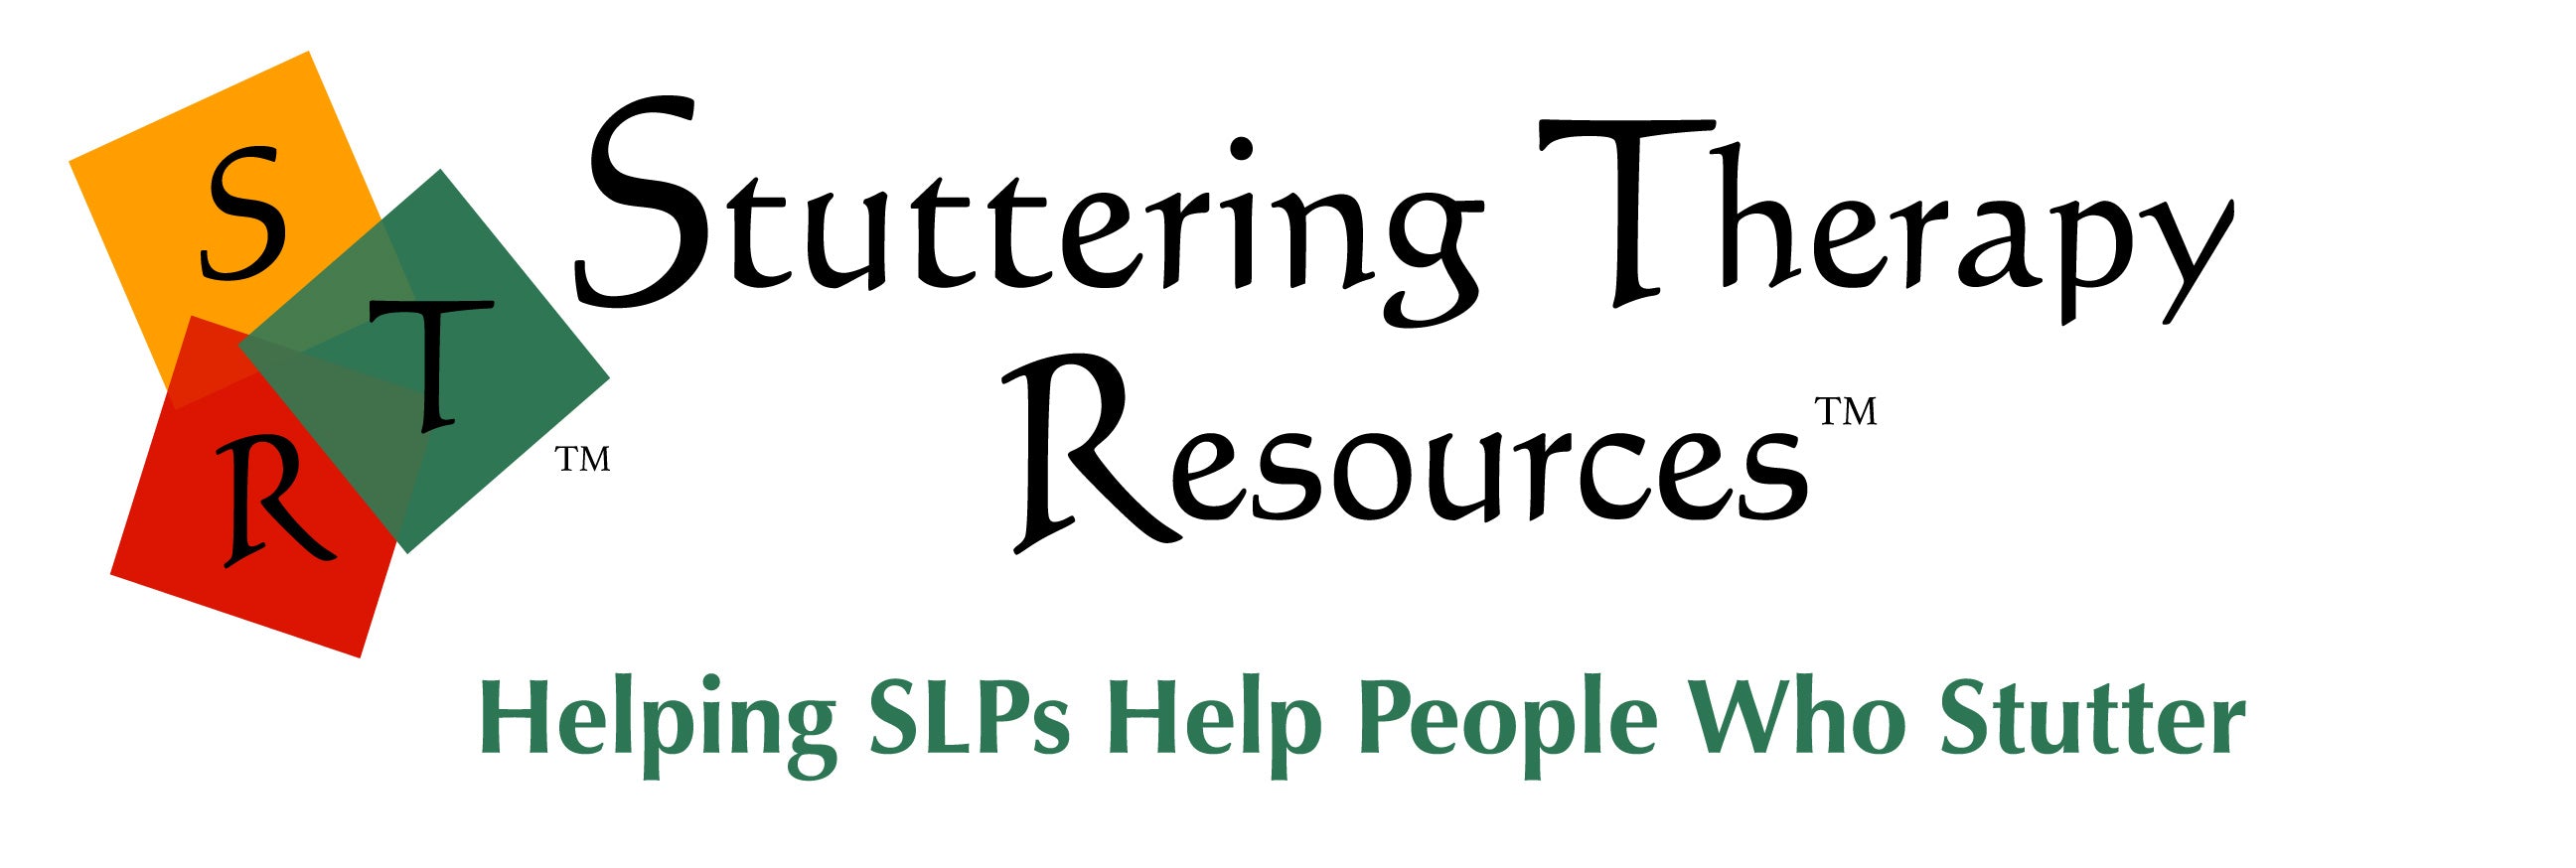 Stuttering Therapy Resources logo Helping SLPs Help People Who Stutter